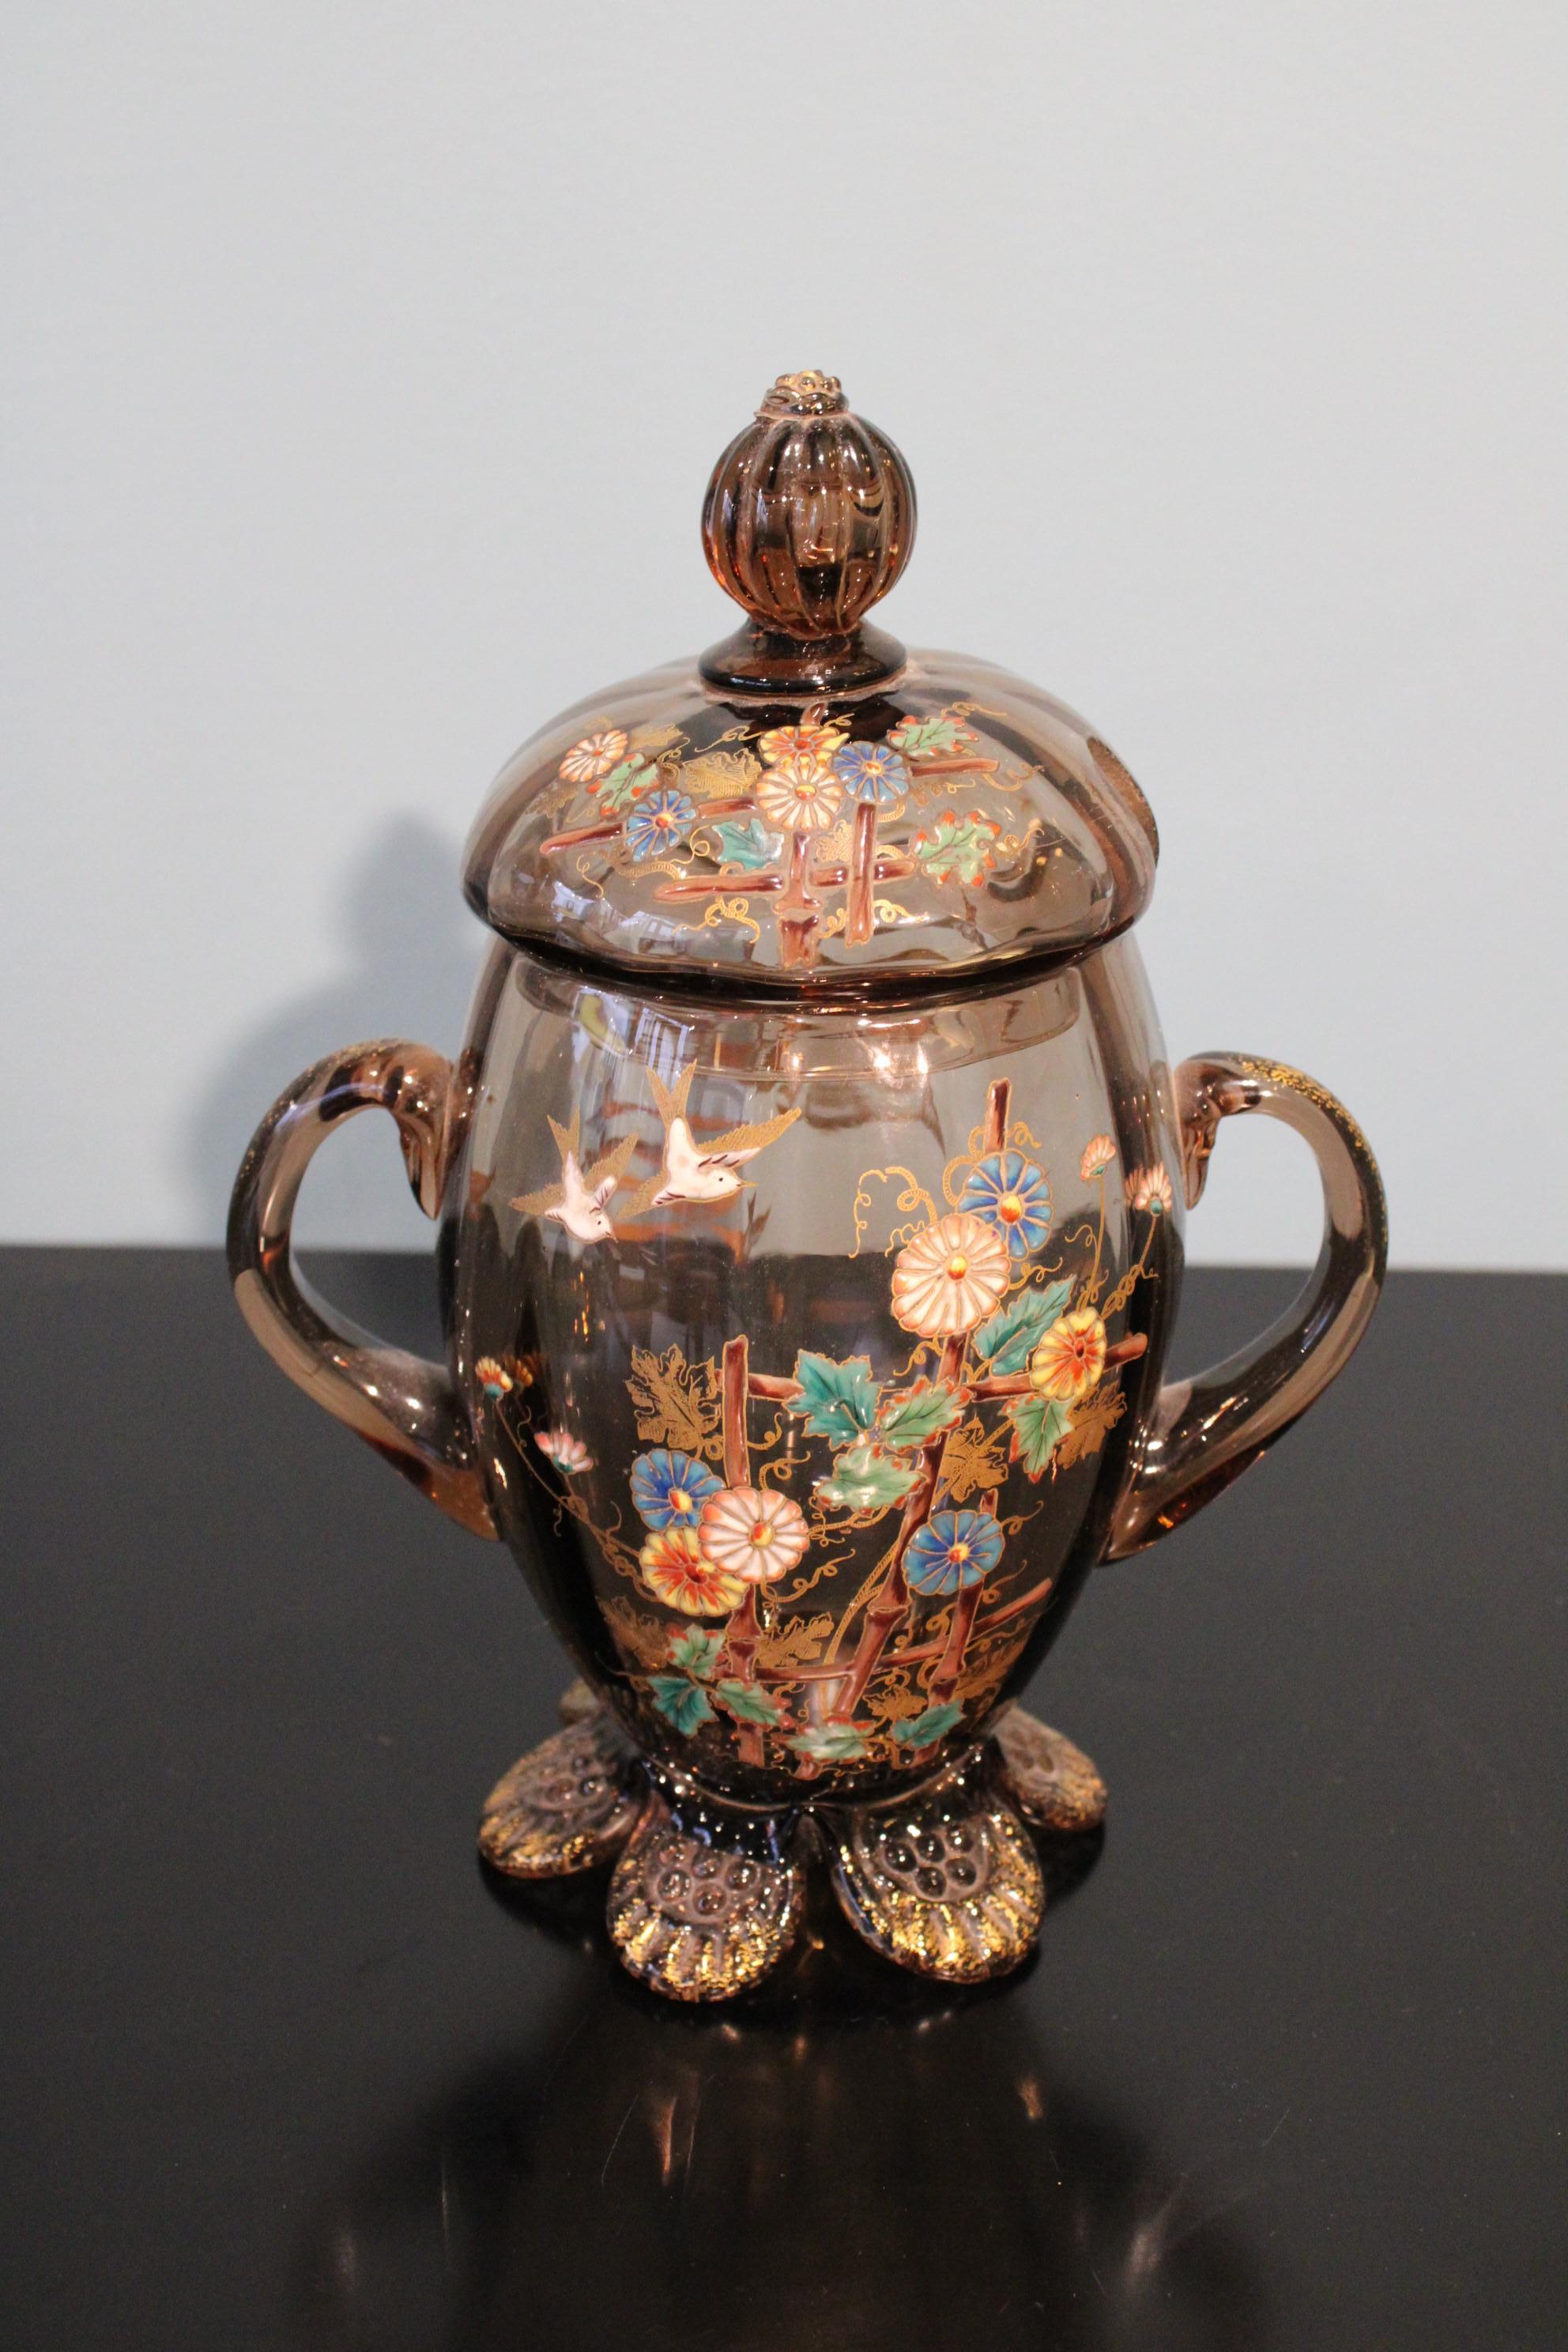 Glassware, with a glass lid.
Enamelled and gilded decor.
Circa 1900, Art Nouveau style.